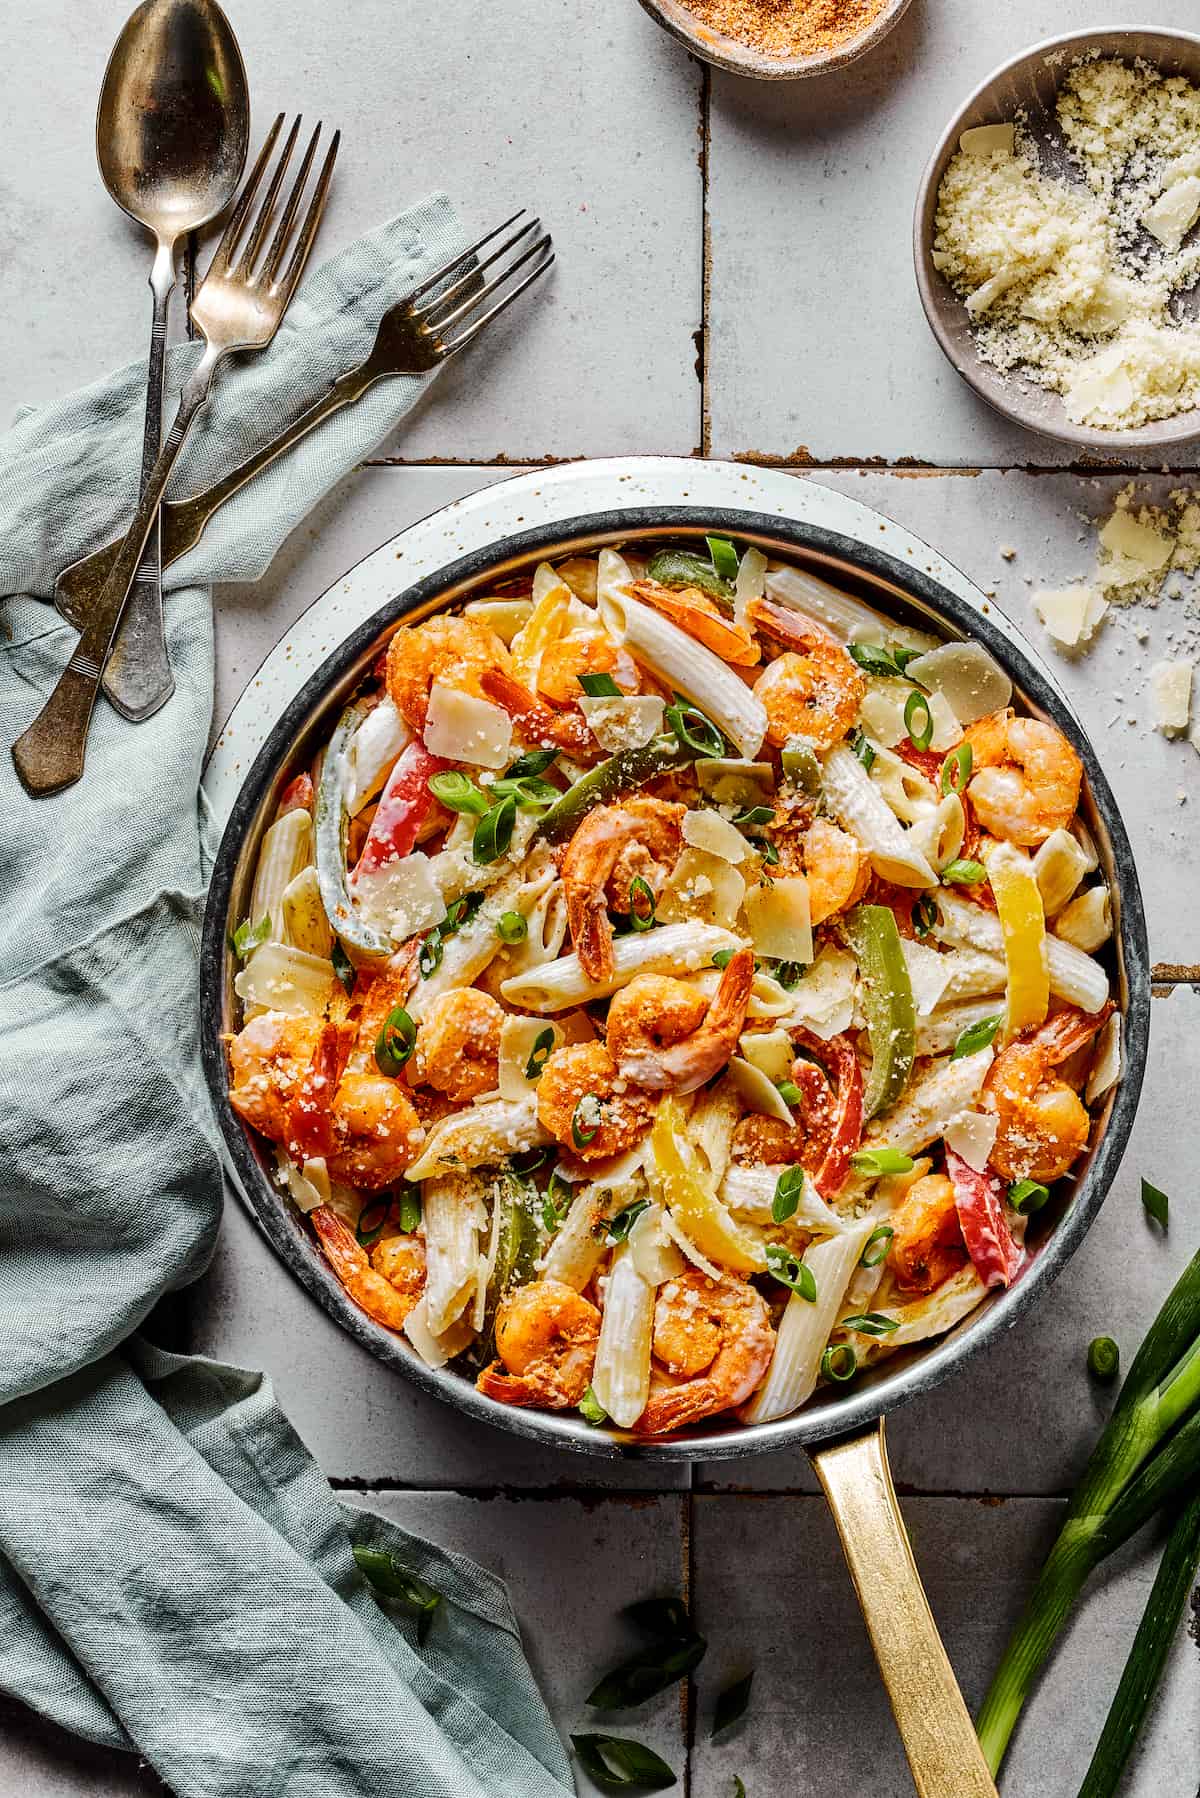 Pasta with shrimp in a skillet, with spoons, forks, and a cloth napkin.